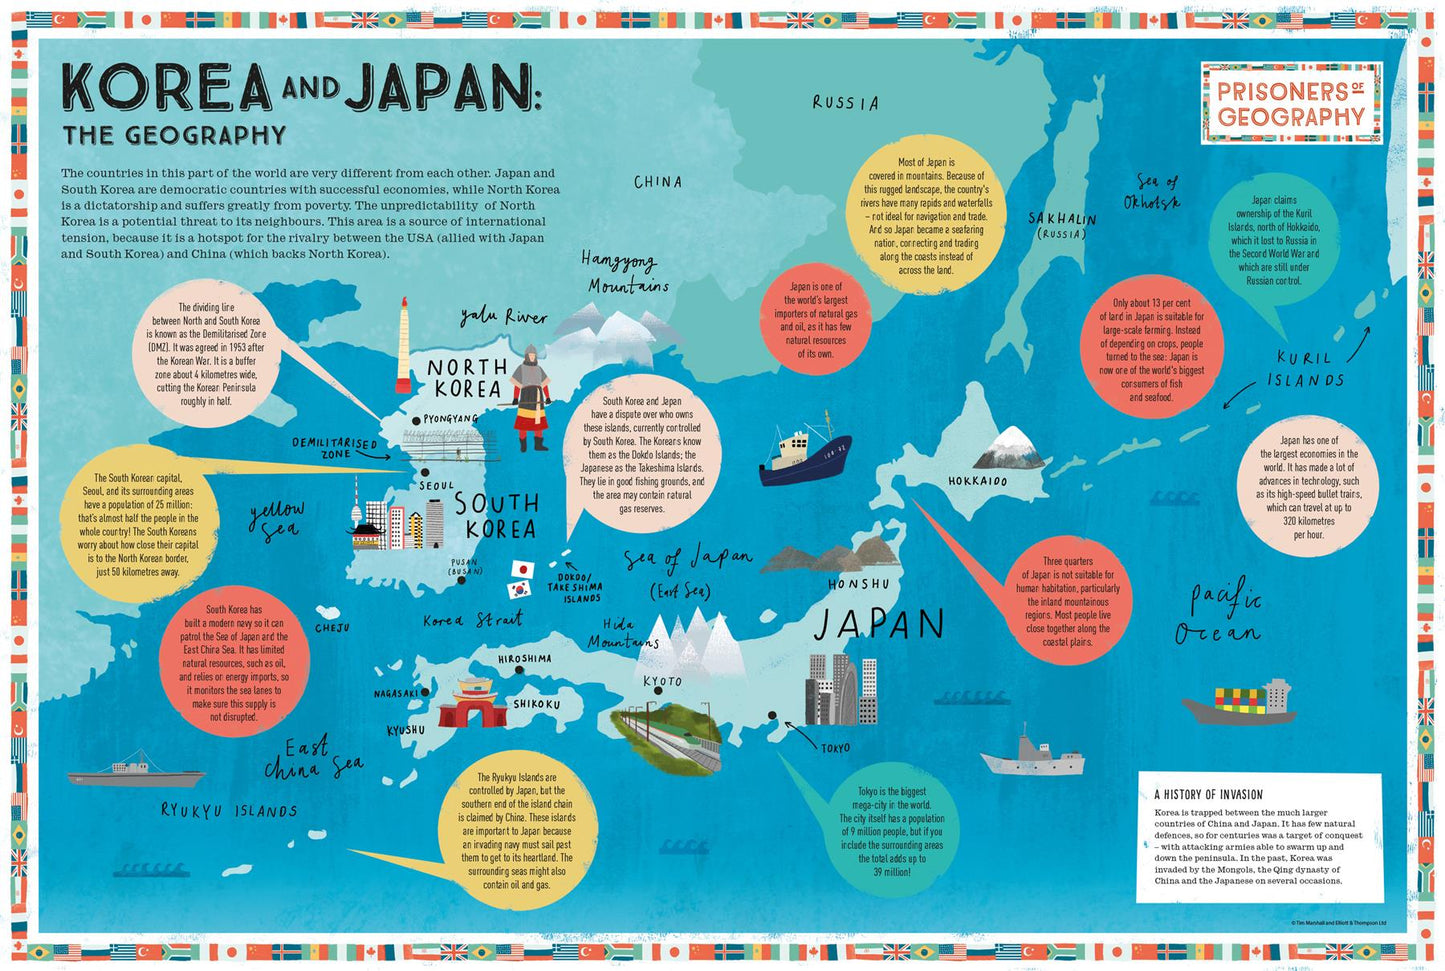 Korea and Japan Educational Wall Map - Prisoners of Geography